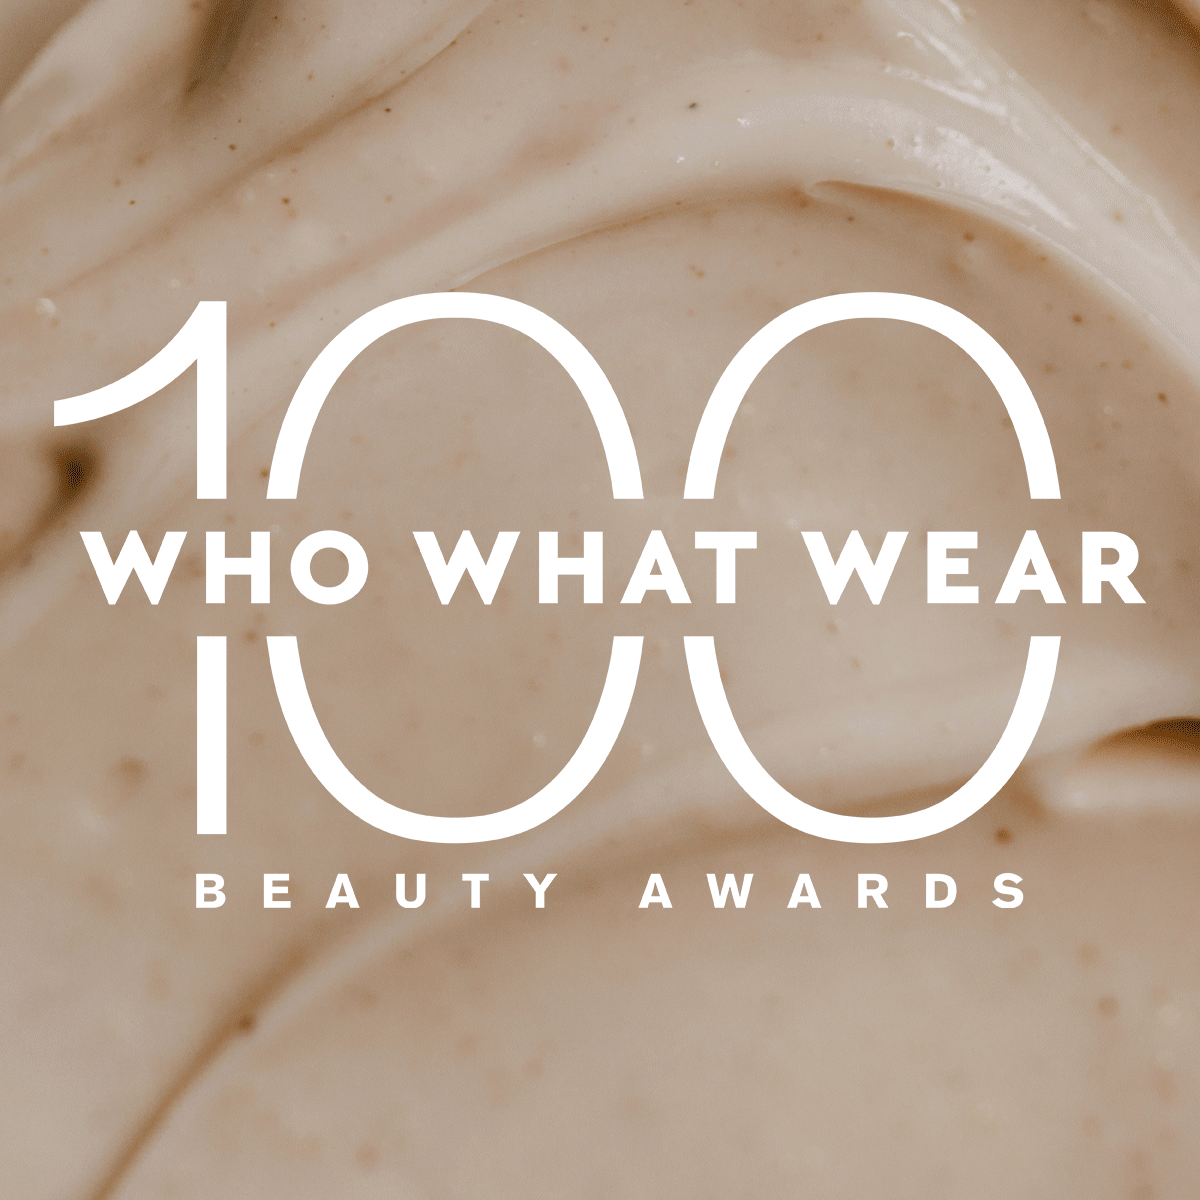 www-100-beauty-awards-submission-info-310368-1698949978816-square